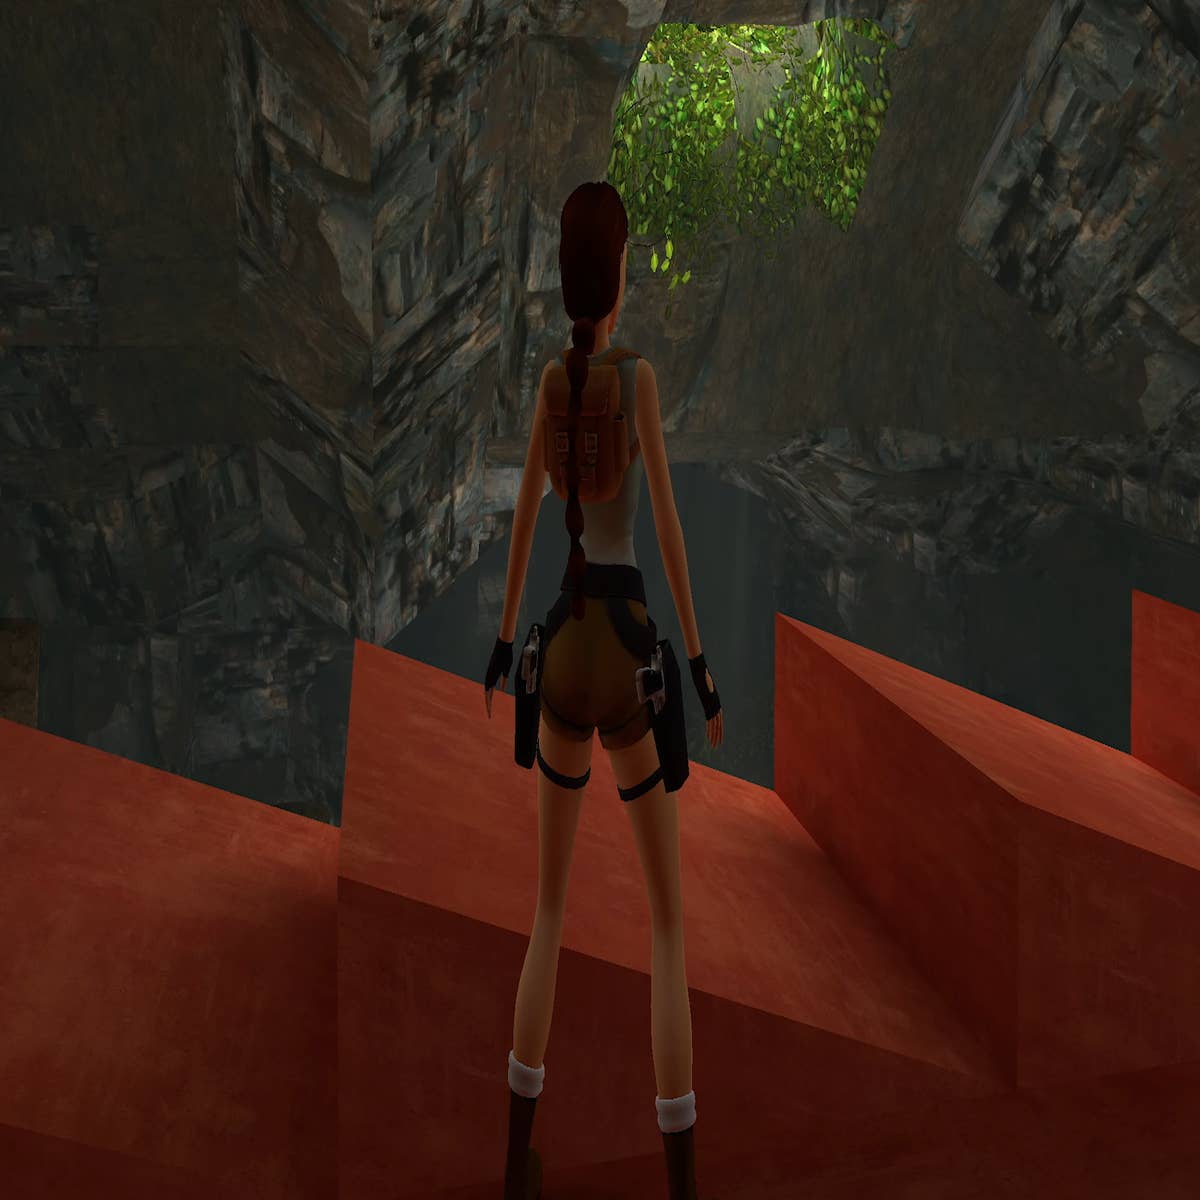 Tomb Raider 1-3 Remastered - a carefully measured, well-executed endeavour